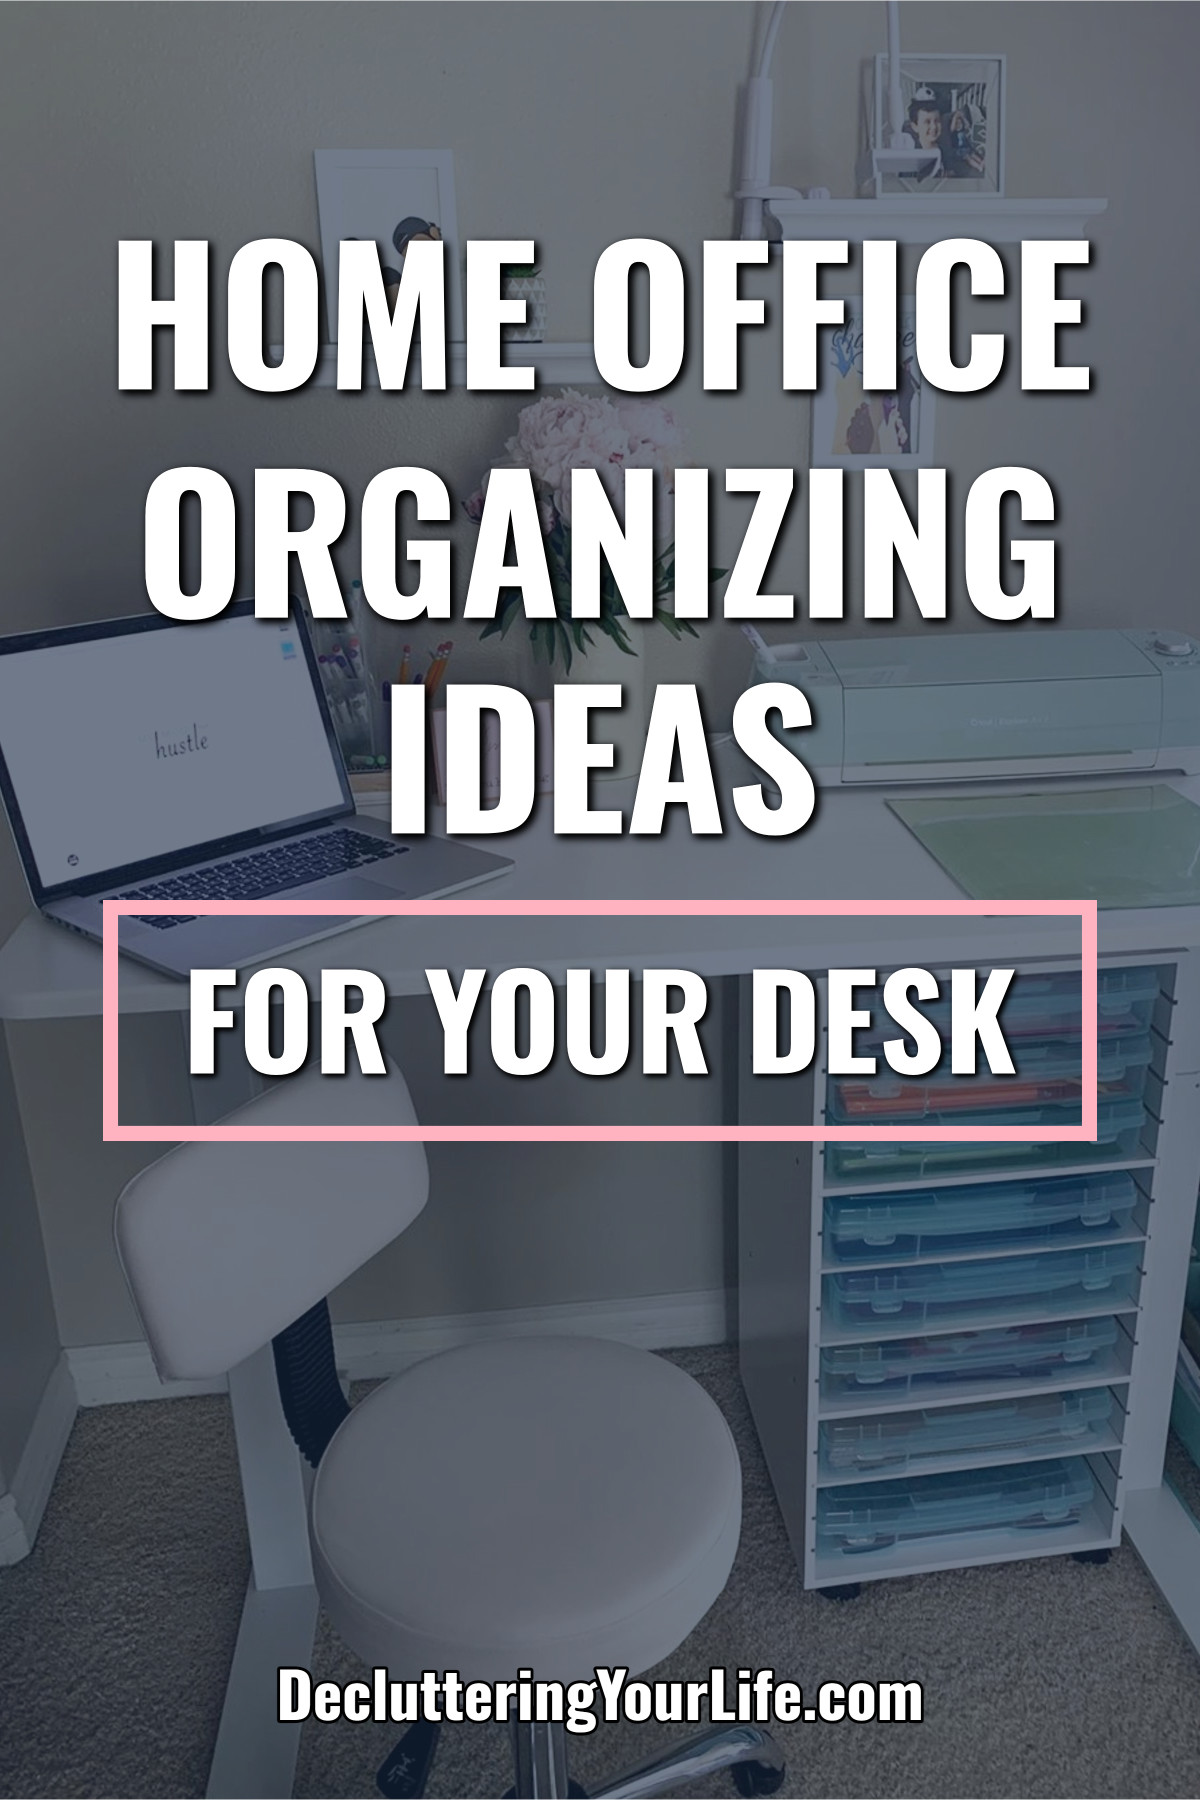 Home Office Organizing Ideas For Your Desk